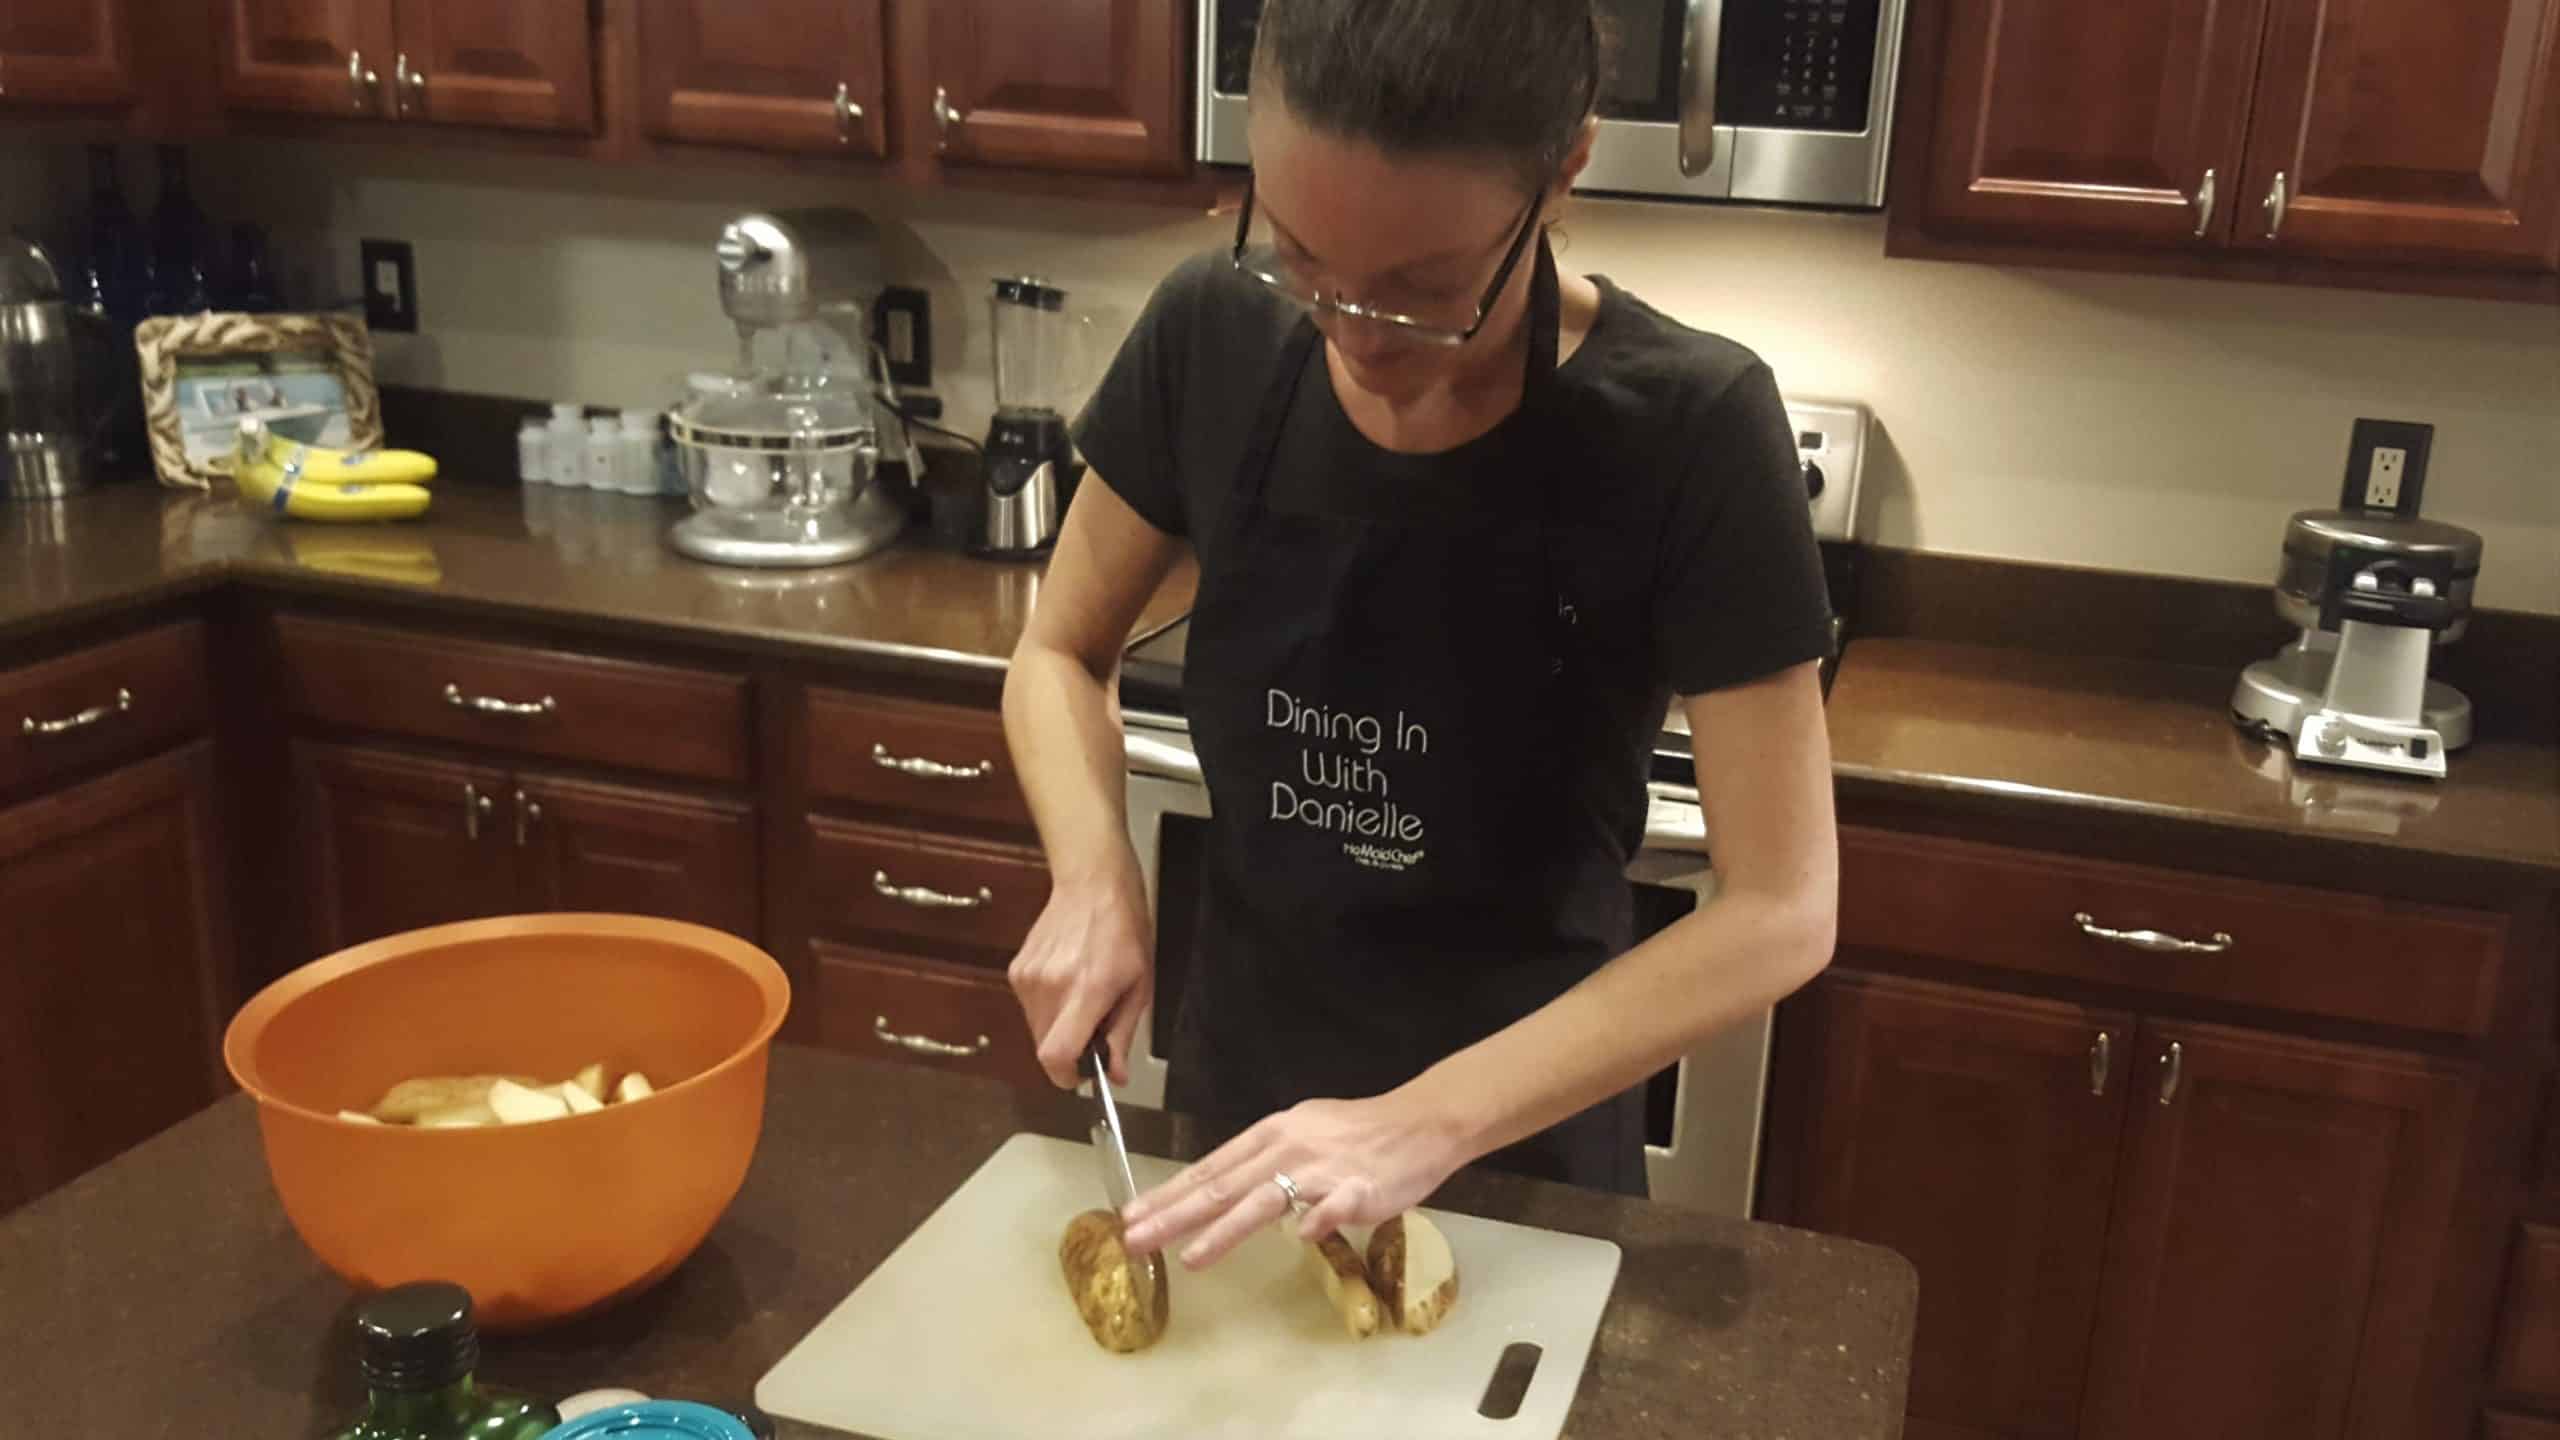 How we cut up our potatoes for Cheesy Crispy Fries - Dining in with Danielle